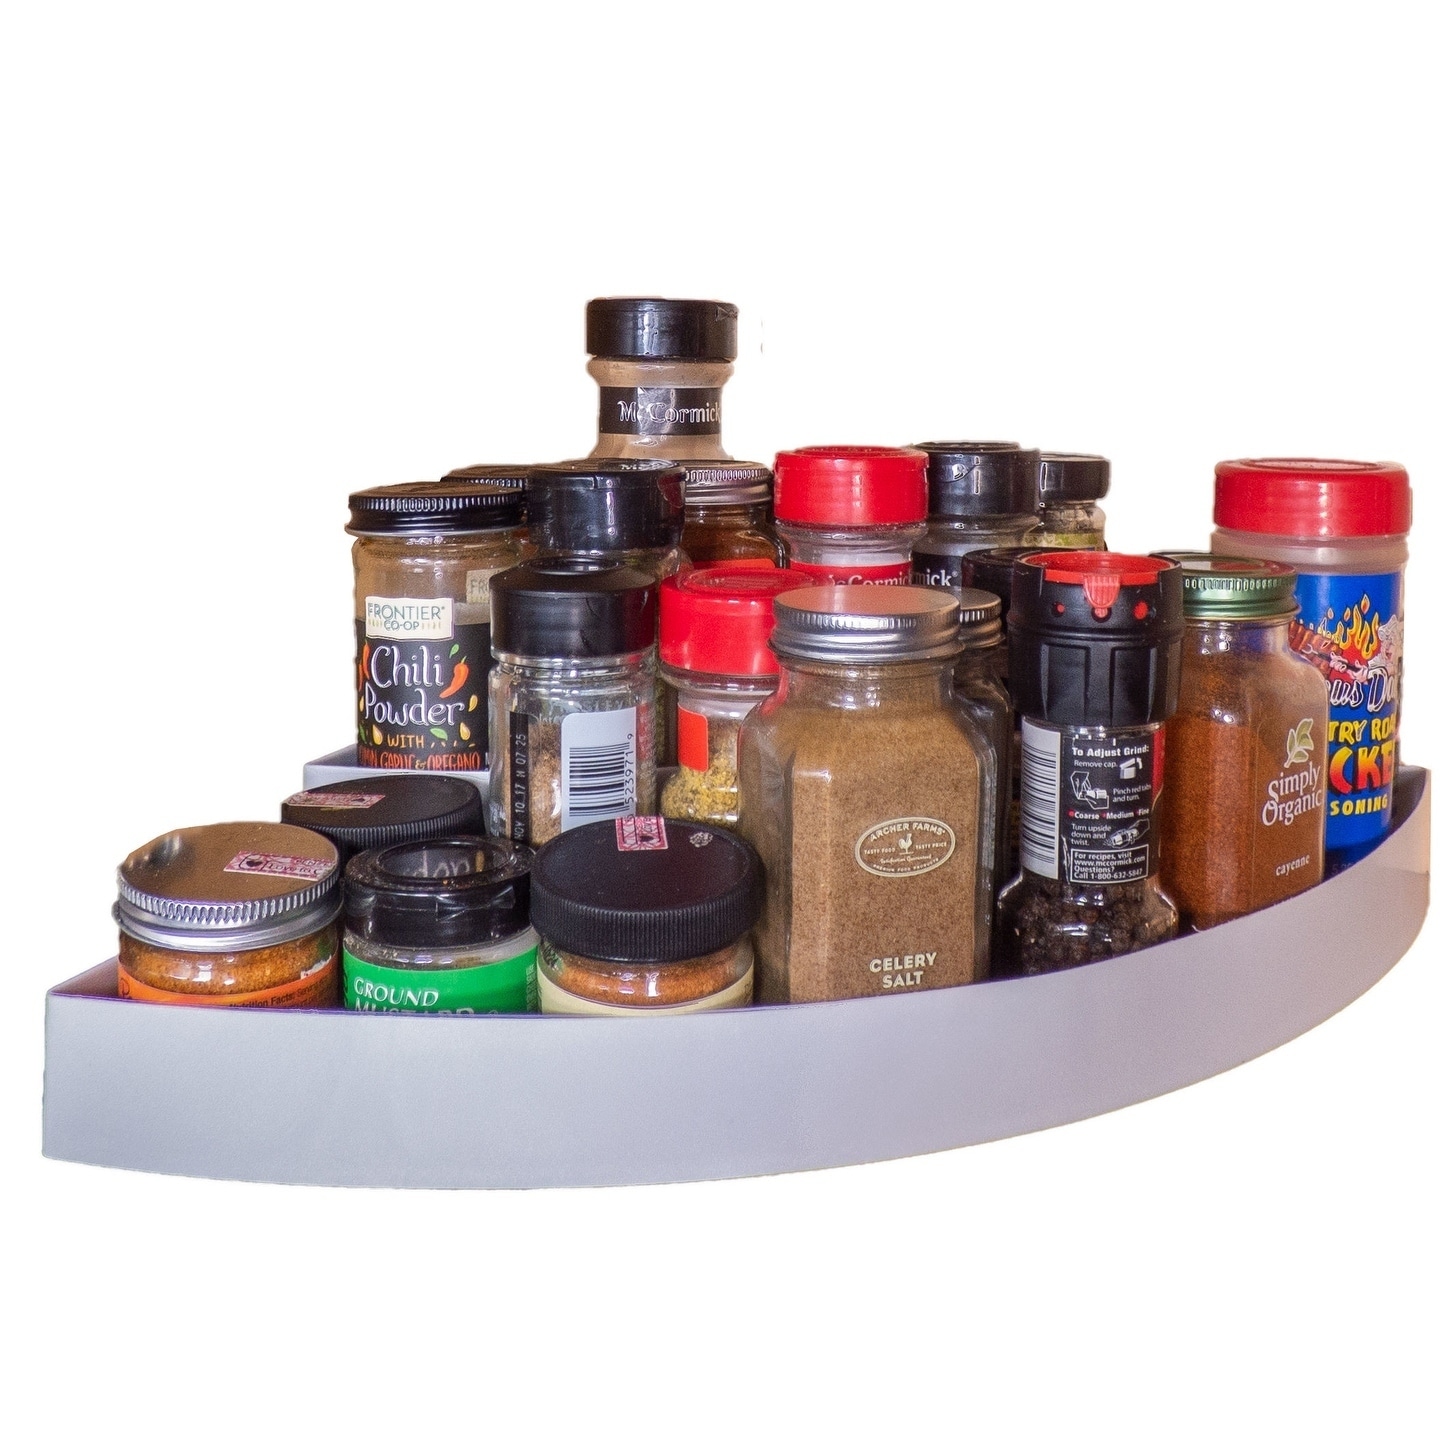 https://ak1.ostkcdn.com/images/products/30376947/Non-Slip-3-Tier-Spice-Rack-Step-Corner-Shelf-Organizer-For-Kitchen-Refrigerator-Pantry-Cabinet-Cupboards-Countertops-dfc1207c-c478-4924-8208-f5759be803d4.jpg